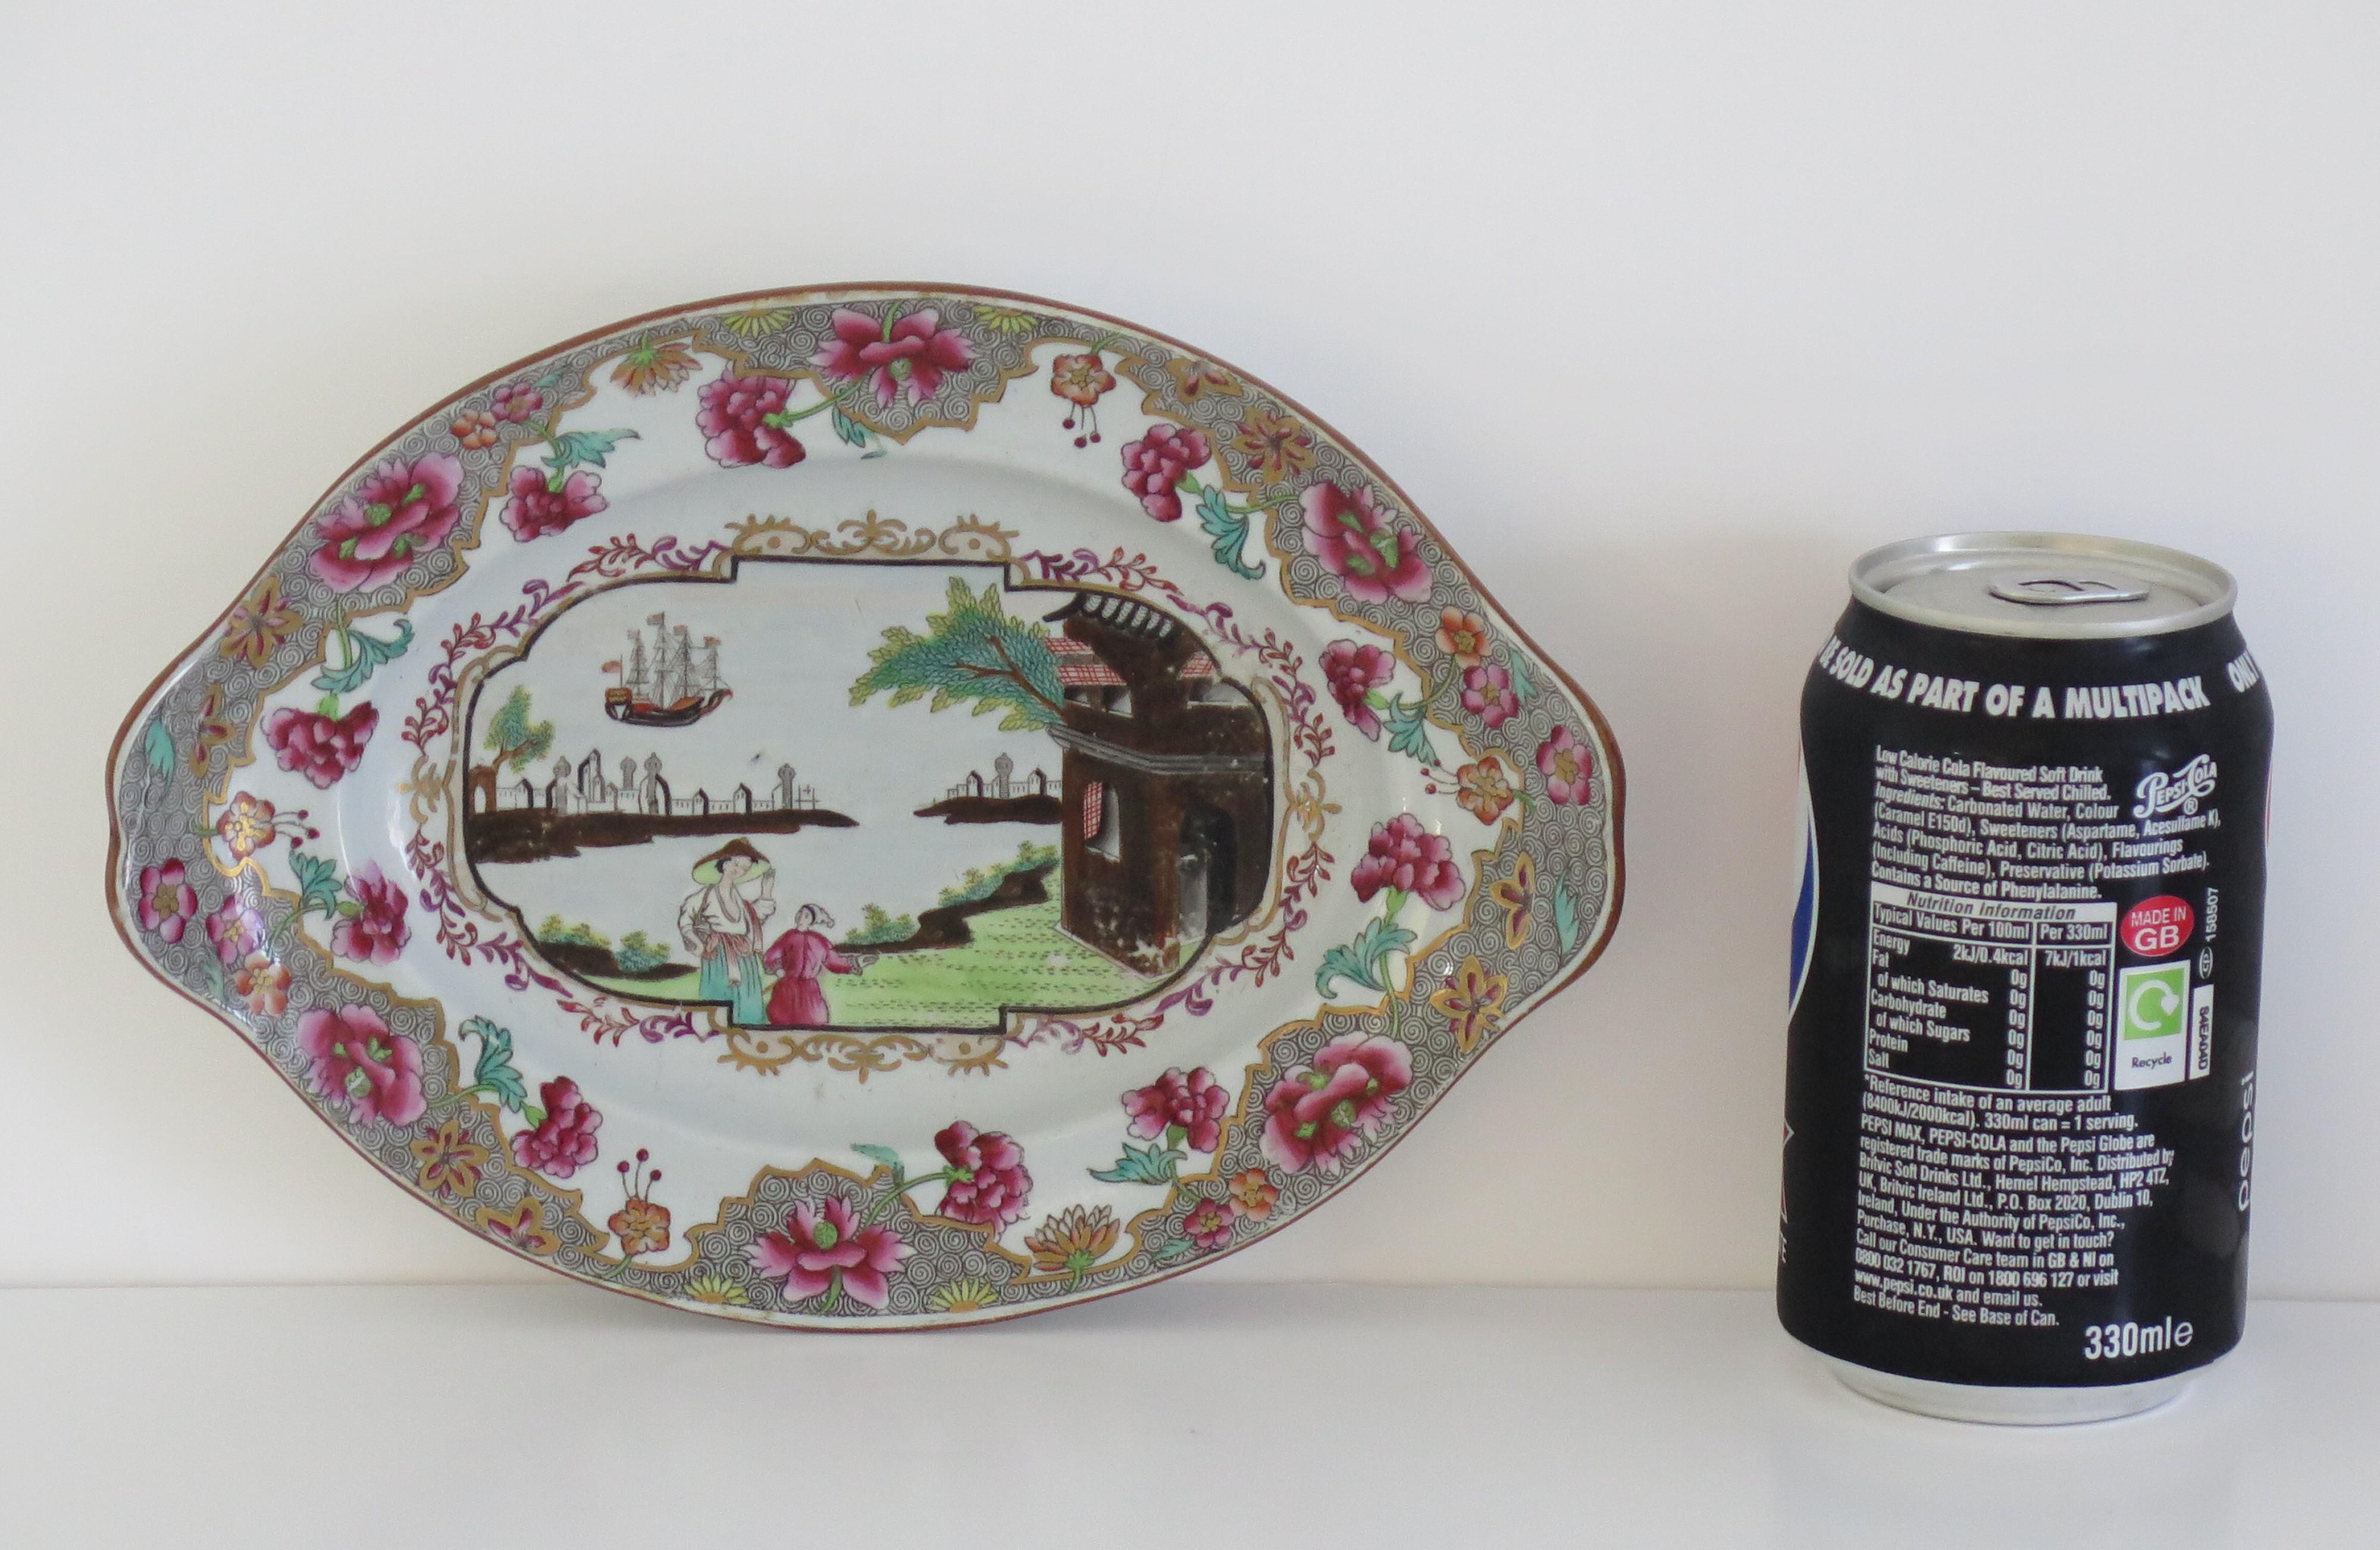 Spode Stone China Small Serving Dish in Ship Pattern 3068, circa 1810 For Sale 2